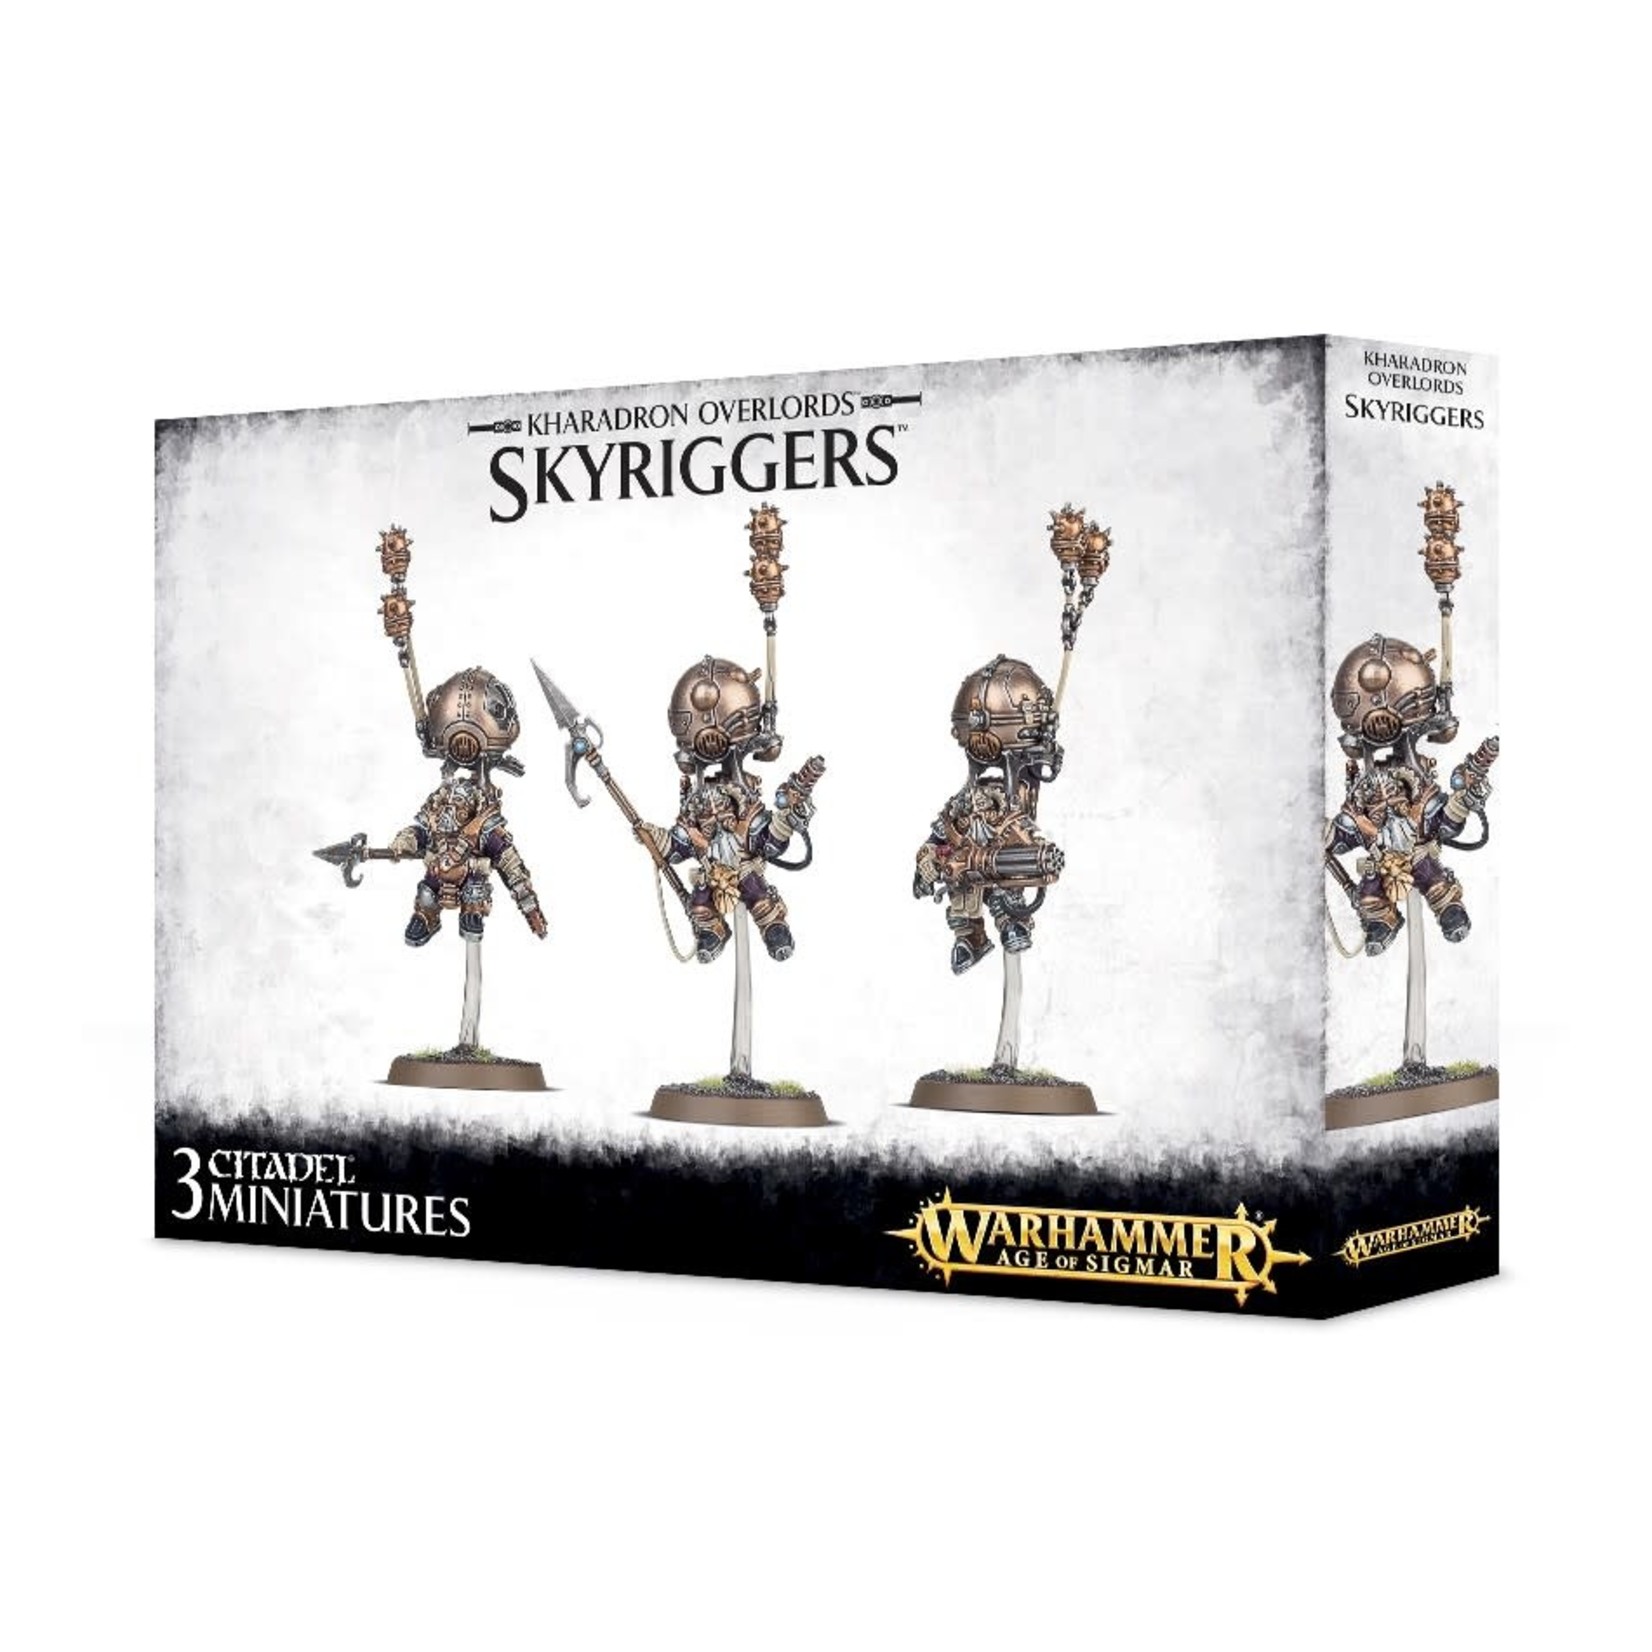 Kharadron Overlords Kharadron Overlords Skyriggers